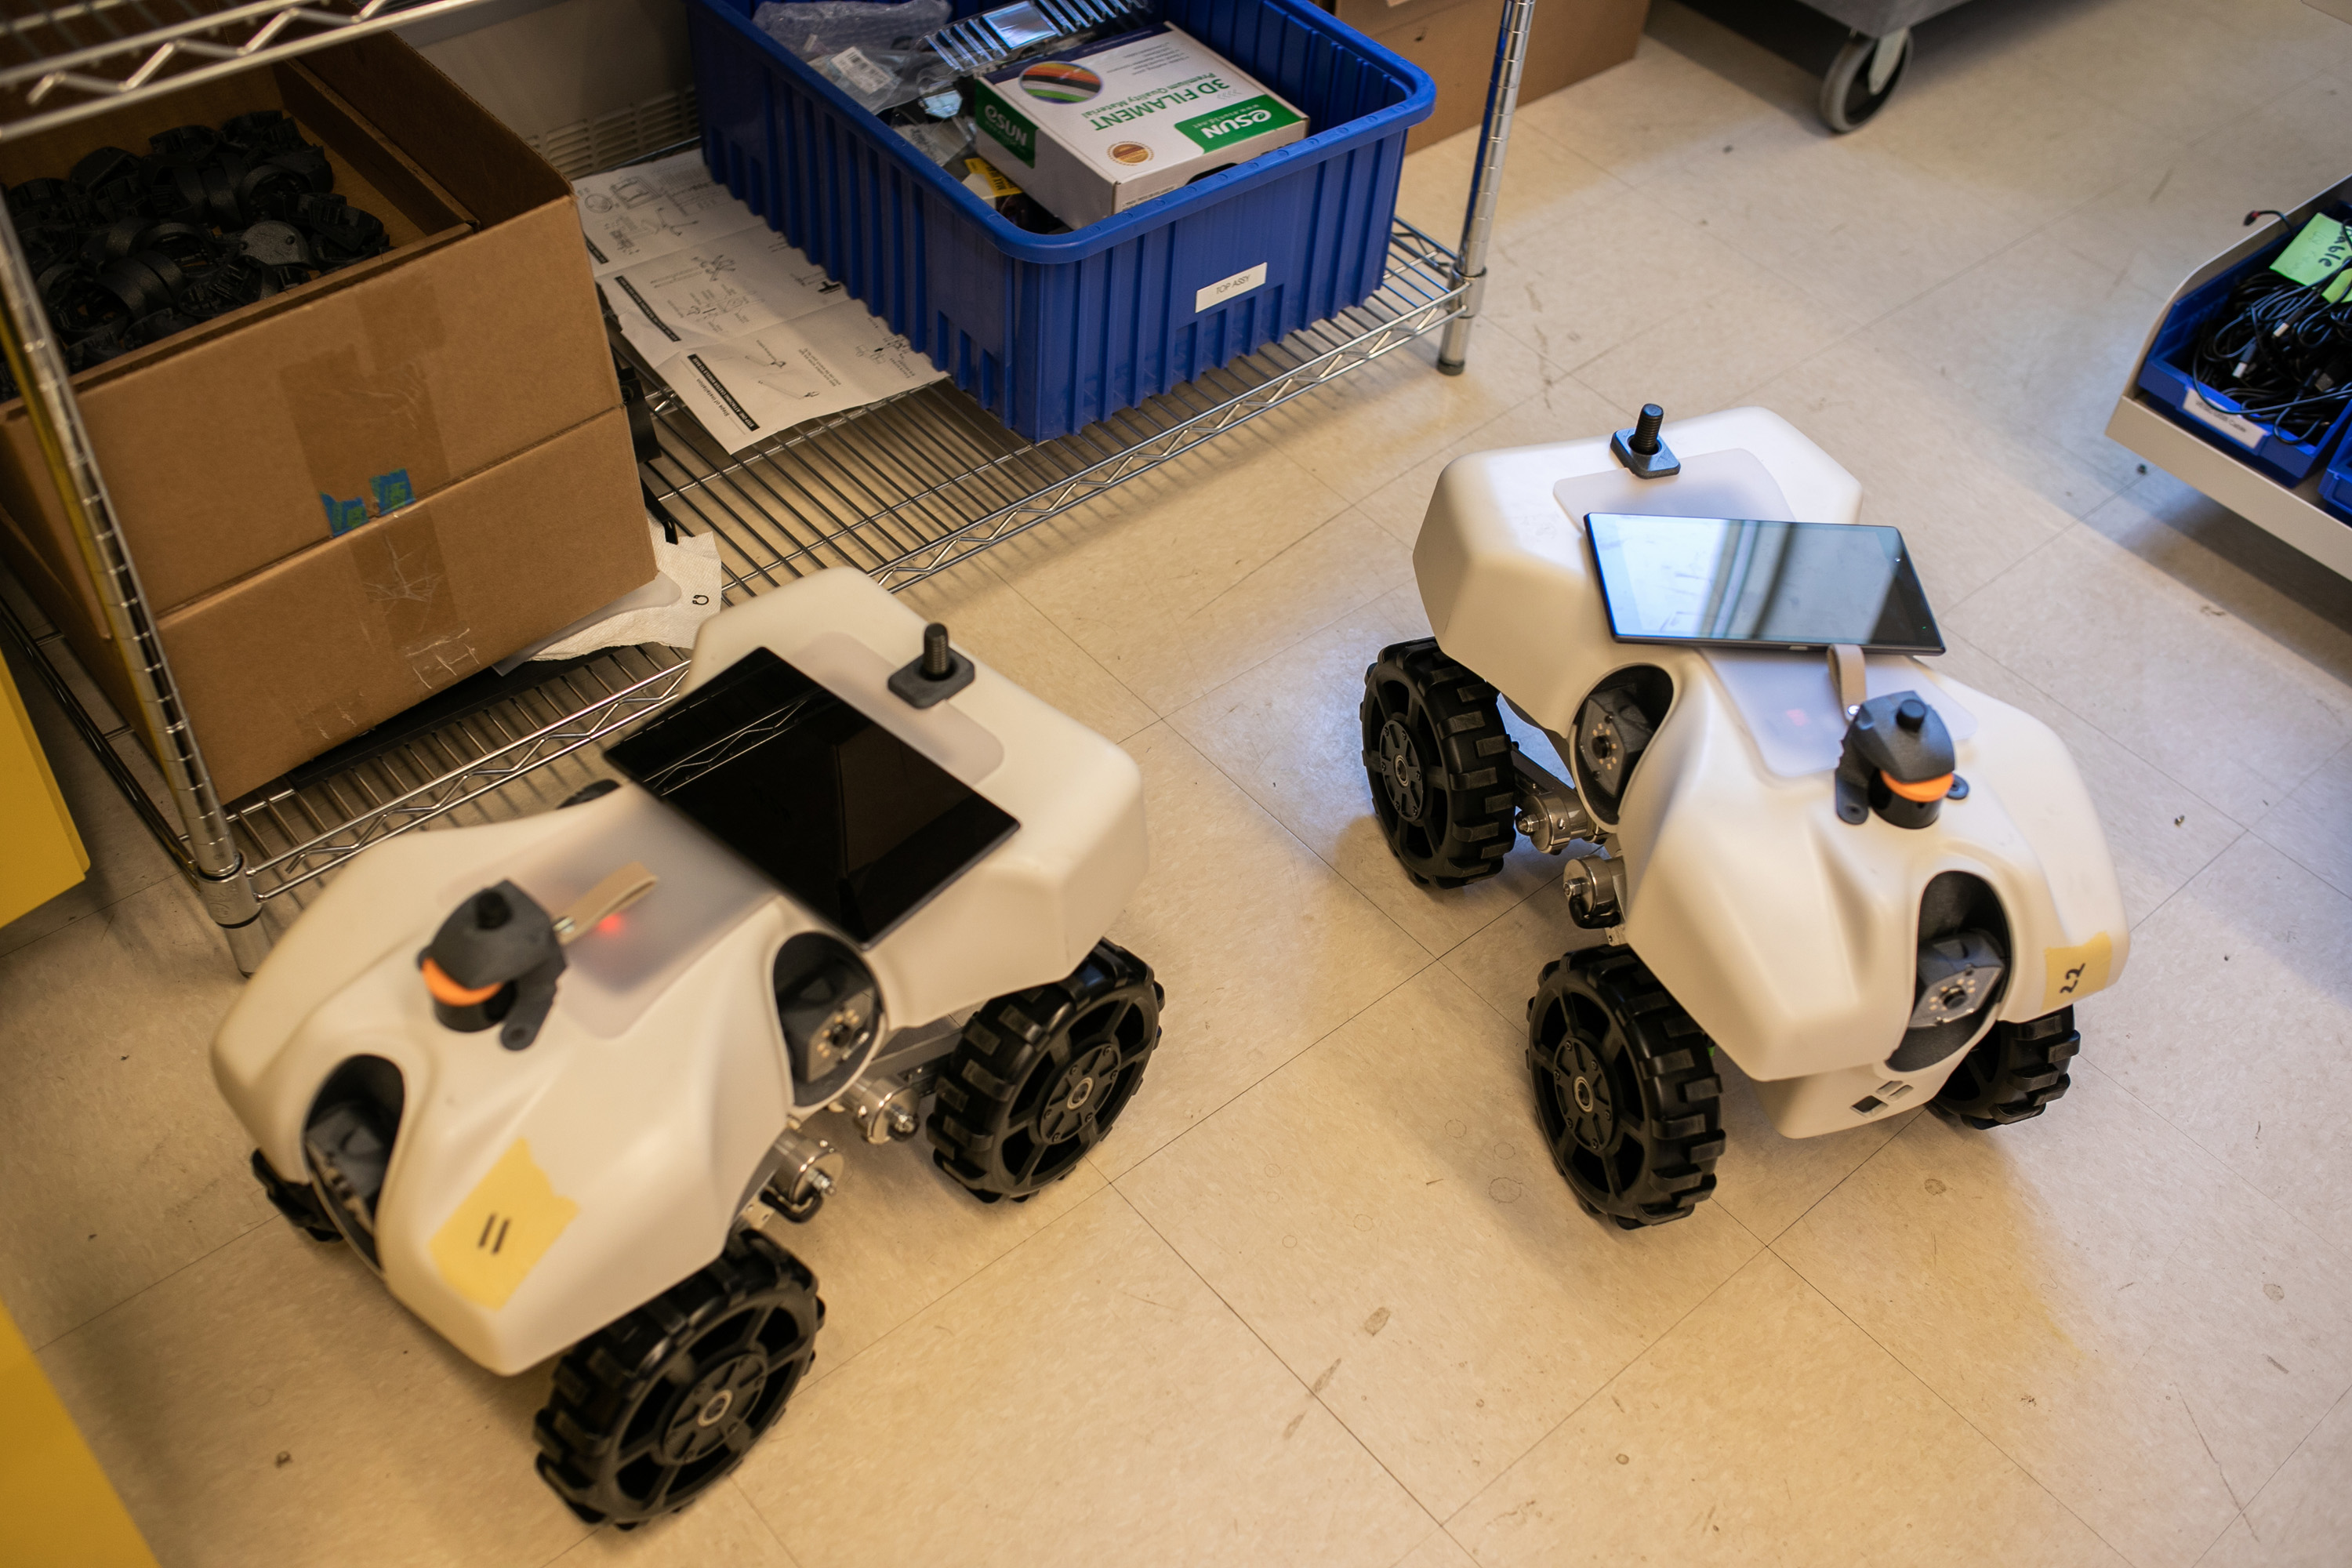 Two models of the TerraSentia robot are located in the laboratory of the agricultural start-up EarthSense at the University of Illinois in Urbana-Champaign.